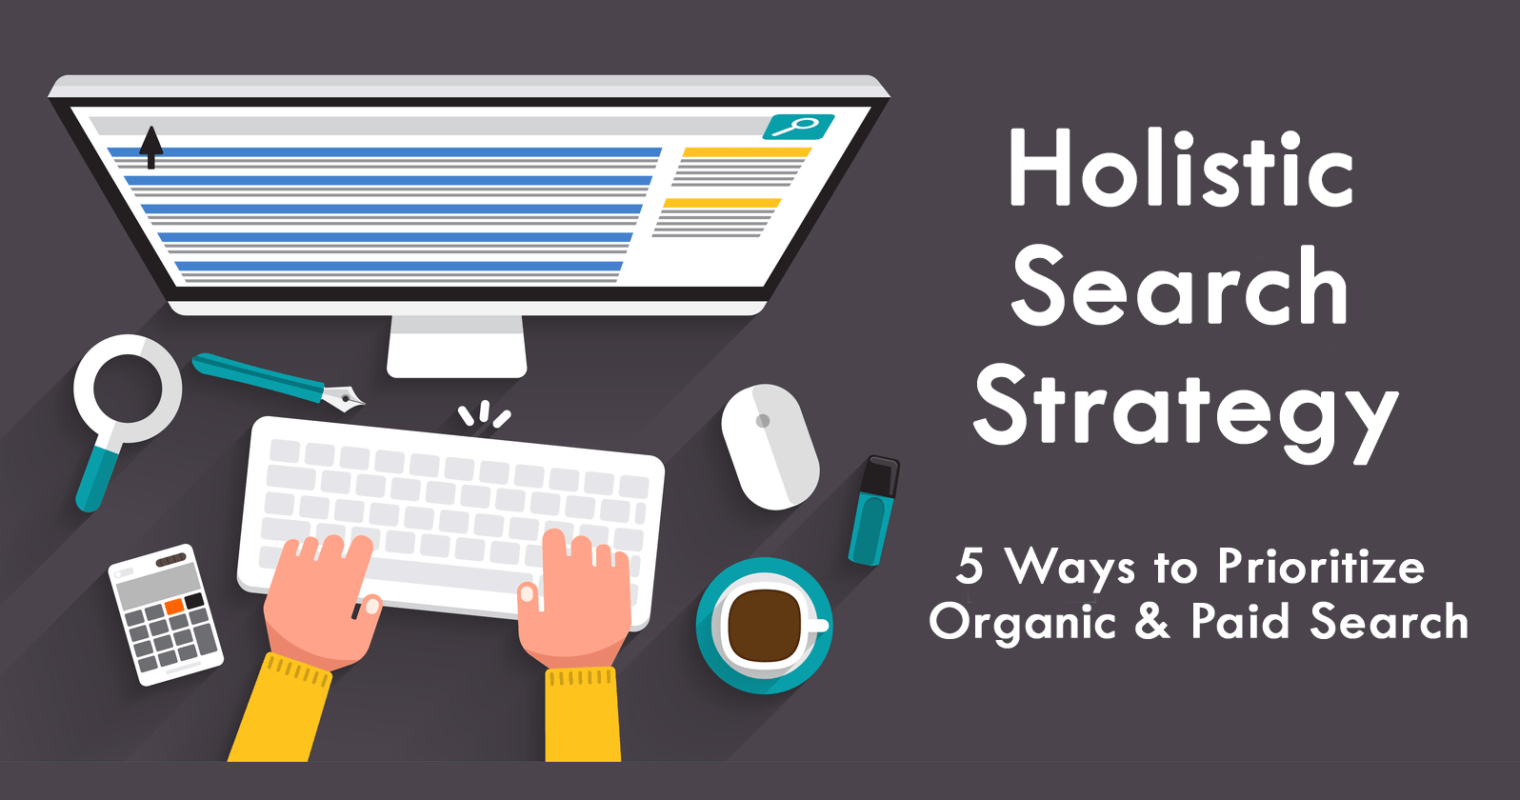 Holistic Search Strategy: 5 Ways to Prioritize Organic & Paid Search